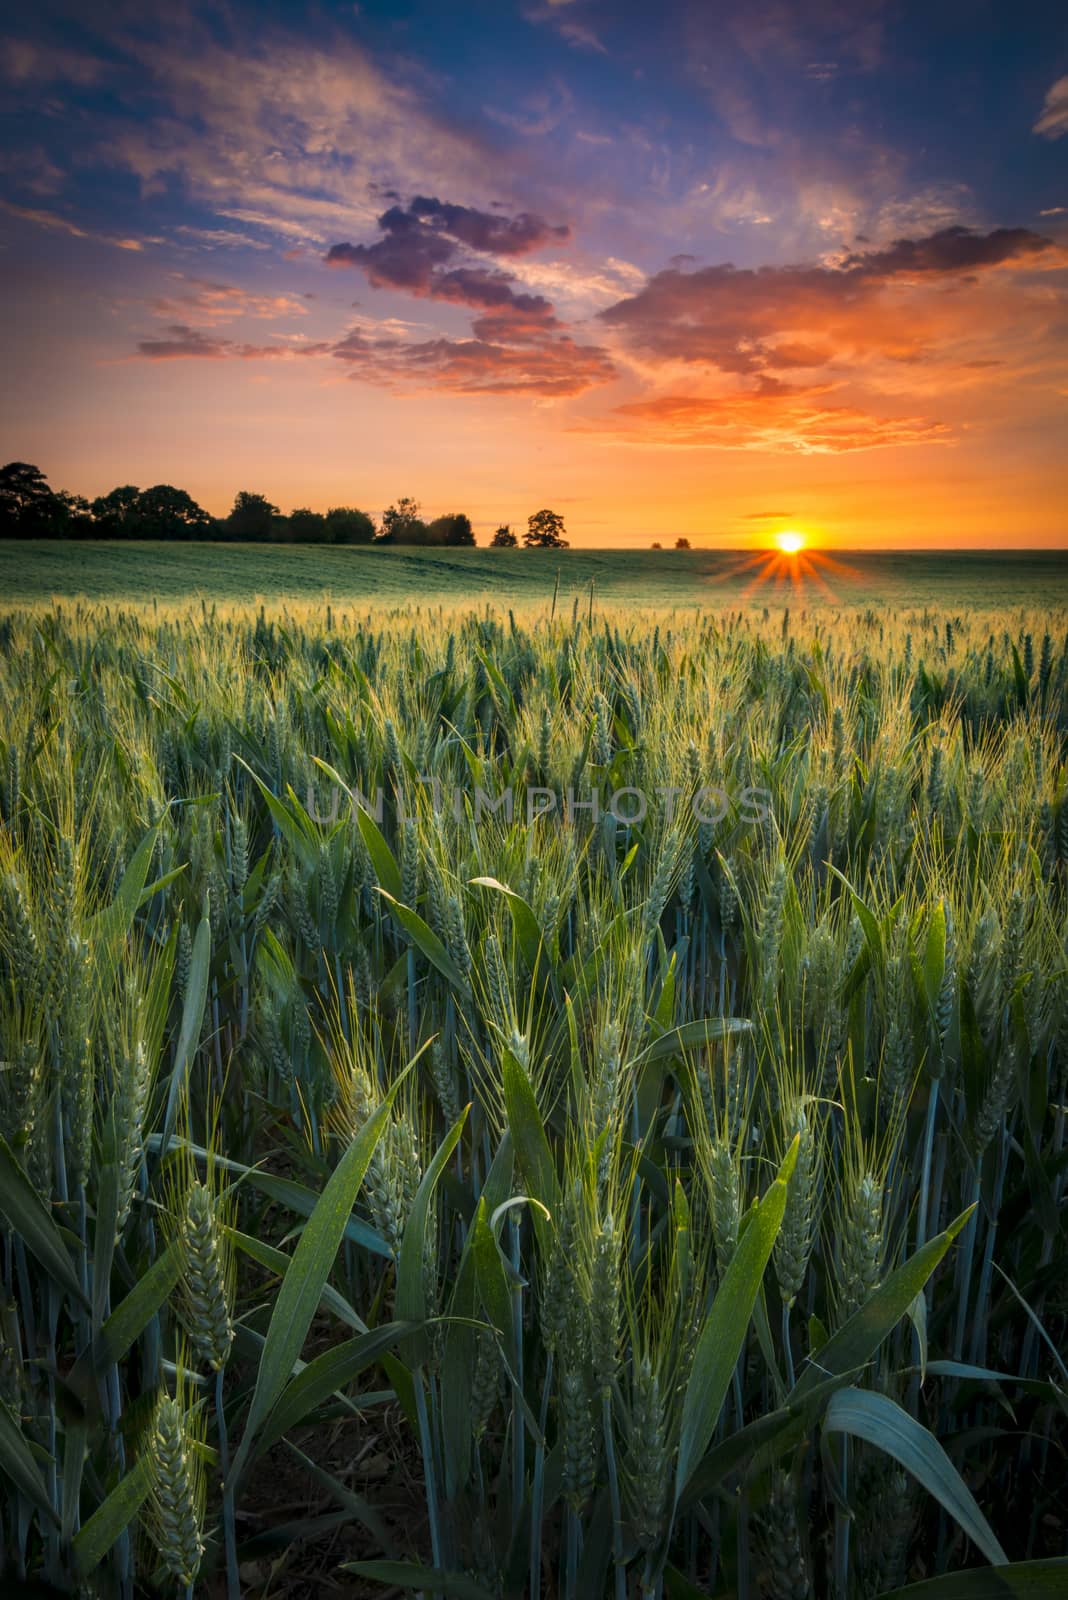 Sunset over a wheat field by allouphoto